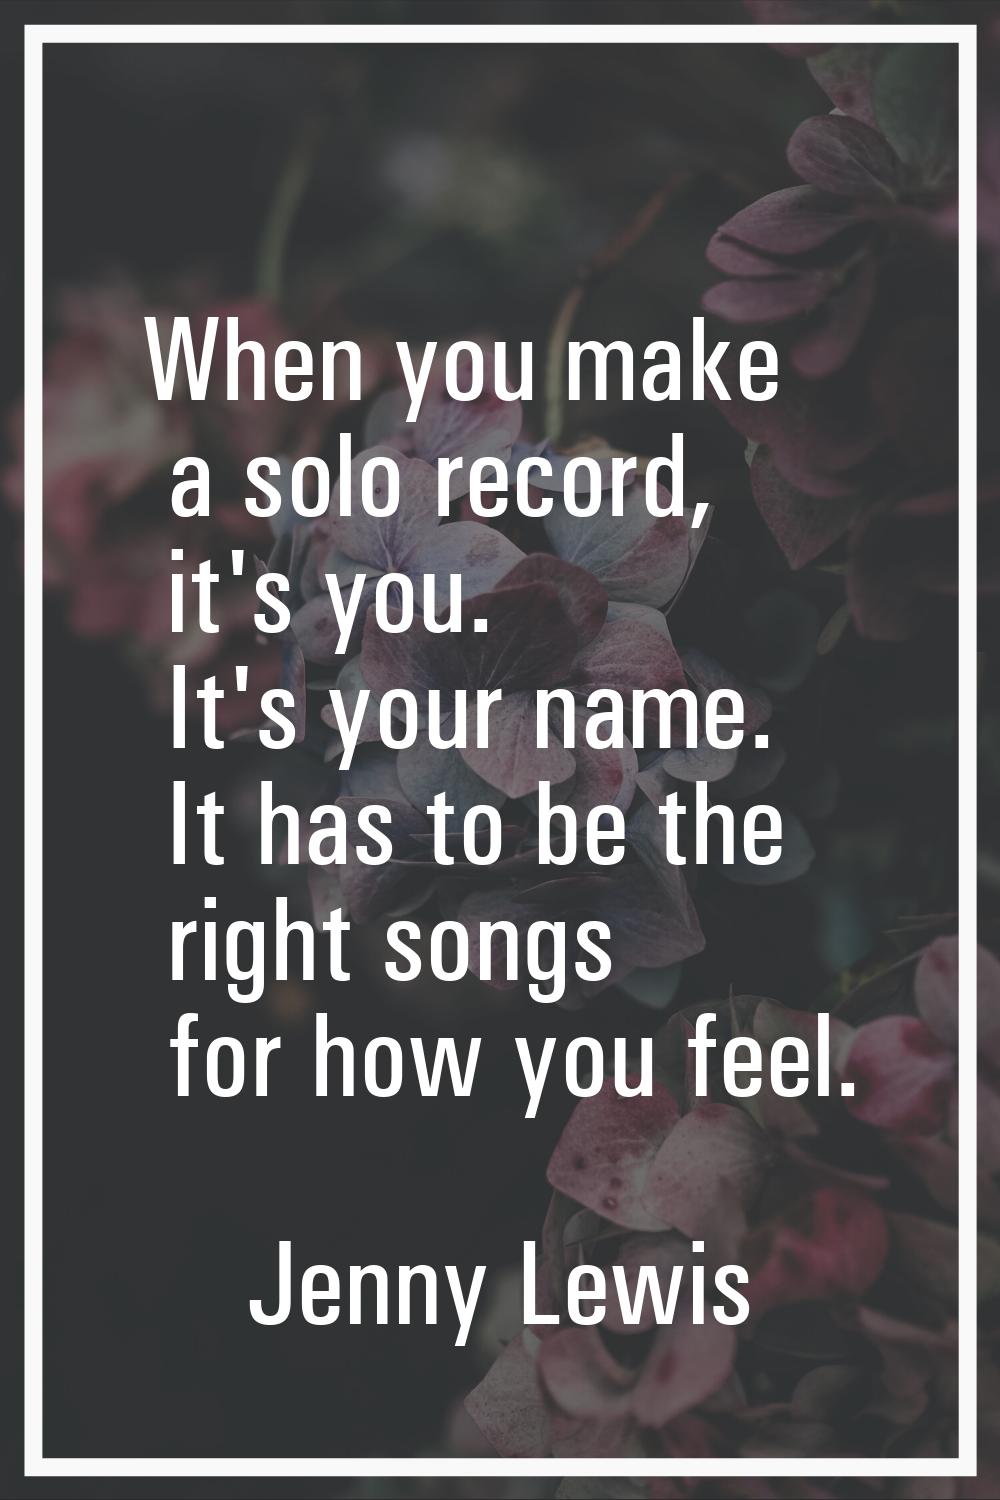 When you make a solo record, it's you. It's your name. It has to be the right songs for how you fee